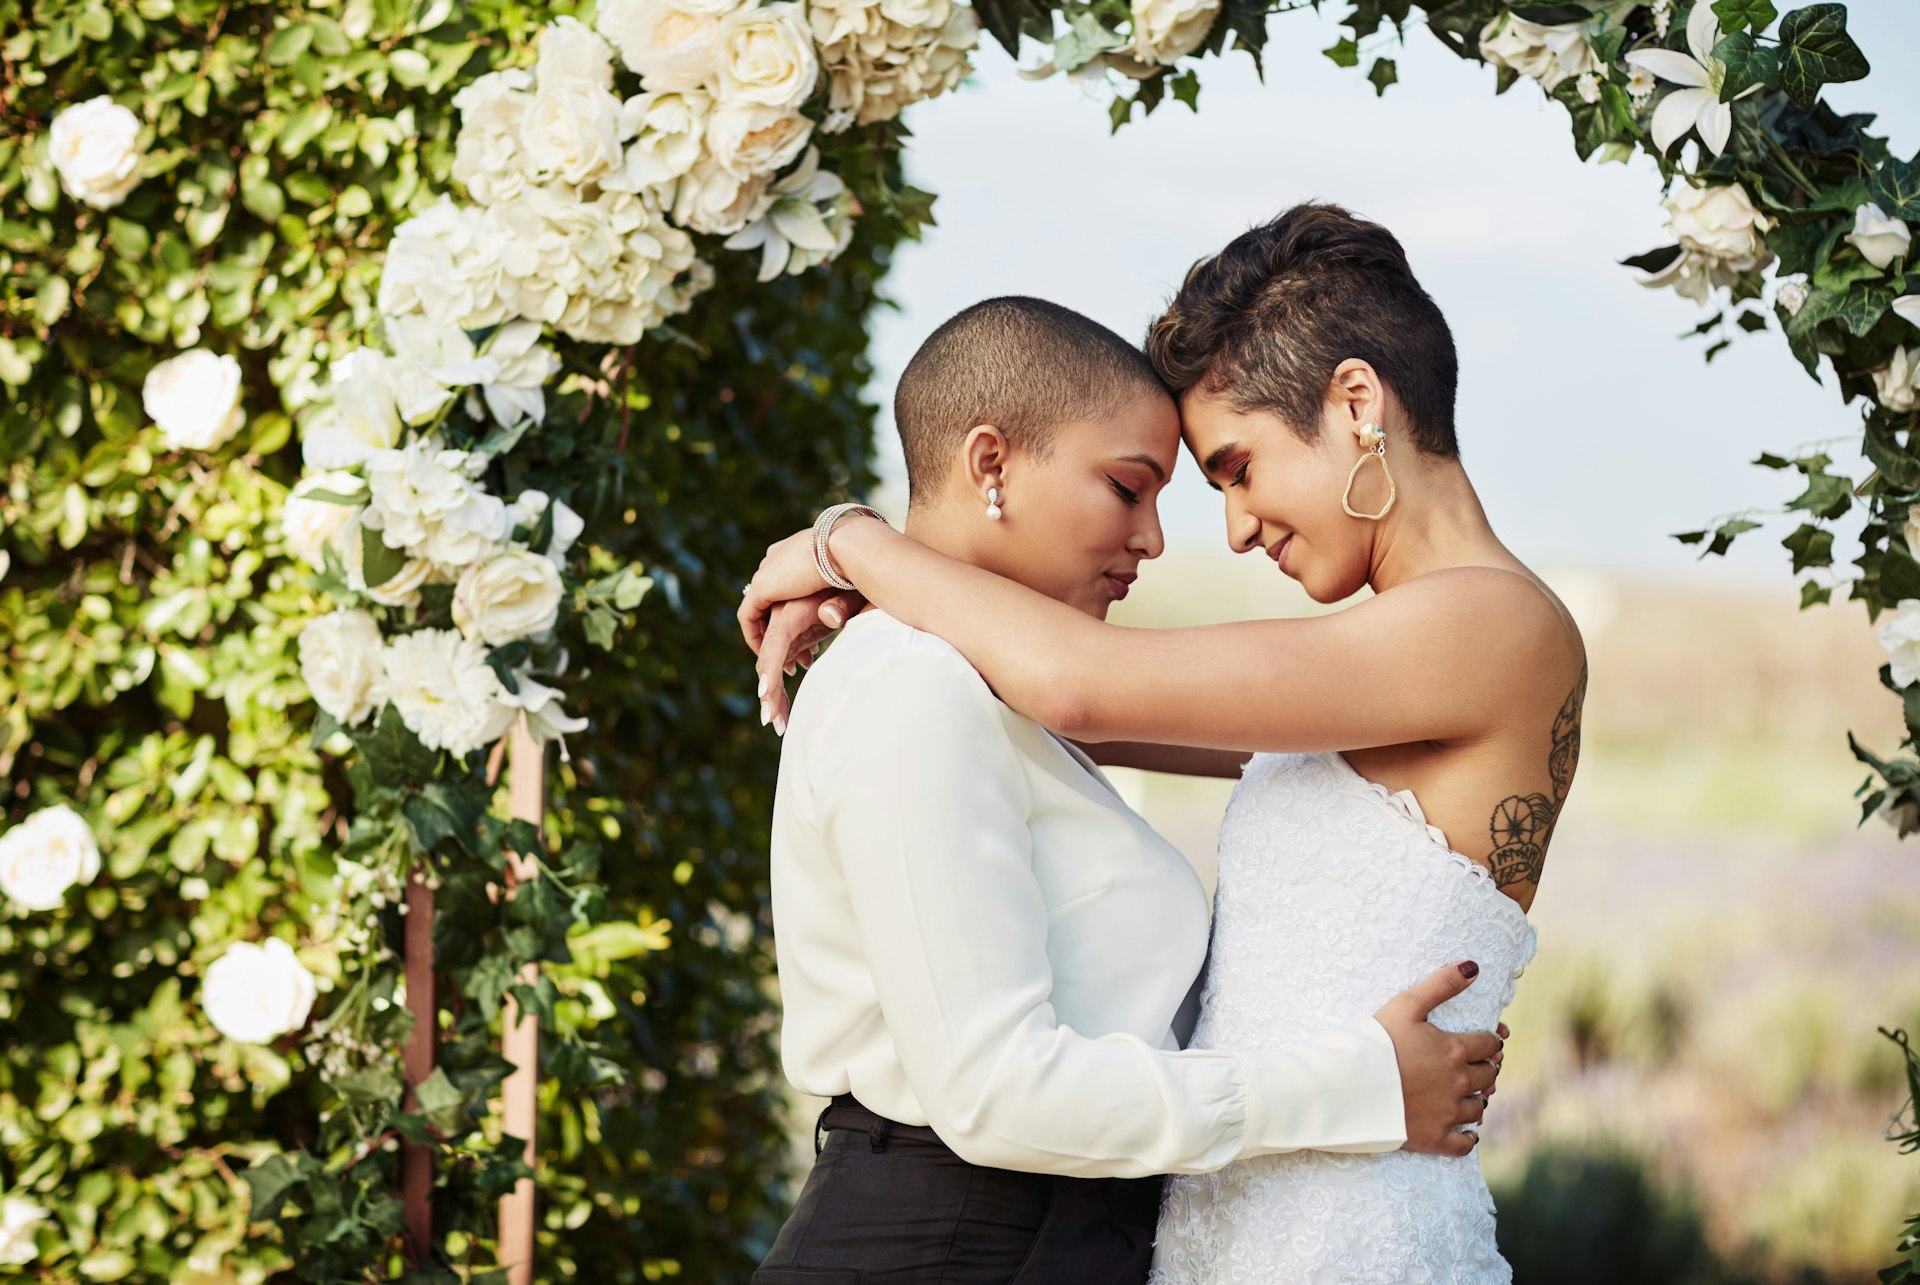 A lesbian couple shares an intimate moment on their wedding day 